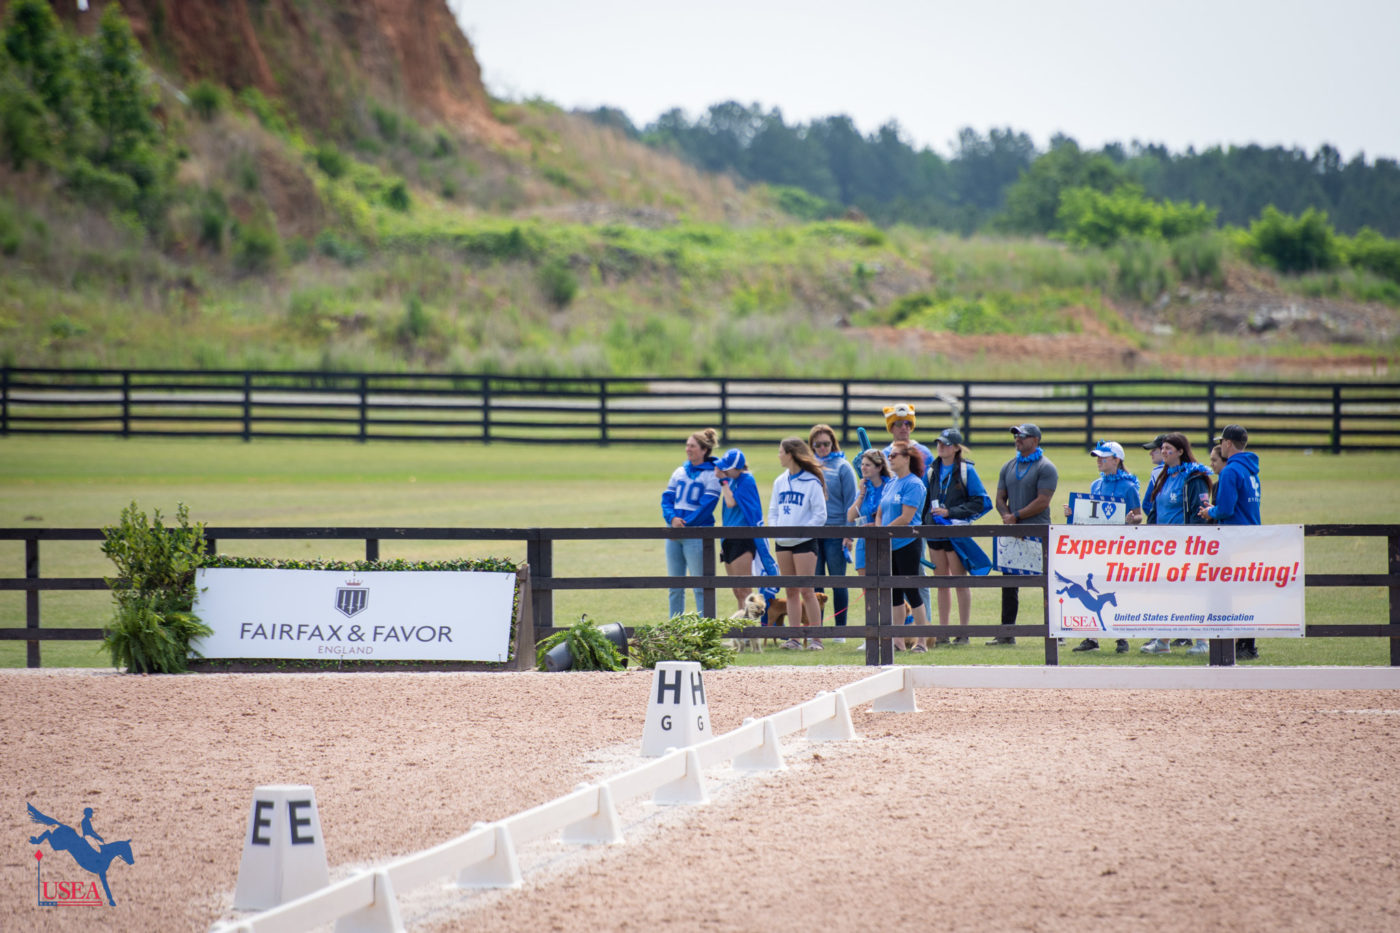 University of Kentucky waiting to cheer on their team members. USEA/Shelby Allen photo